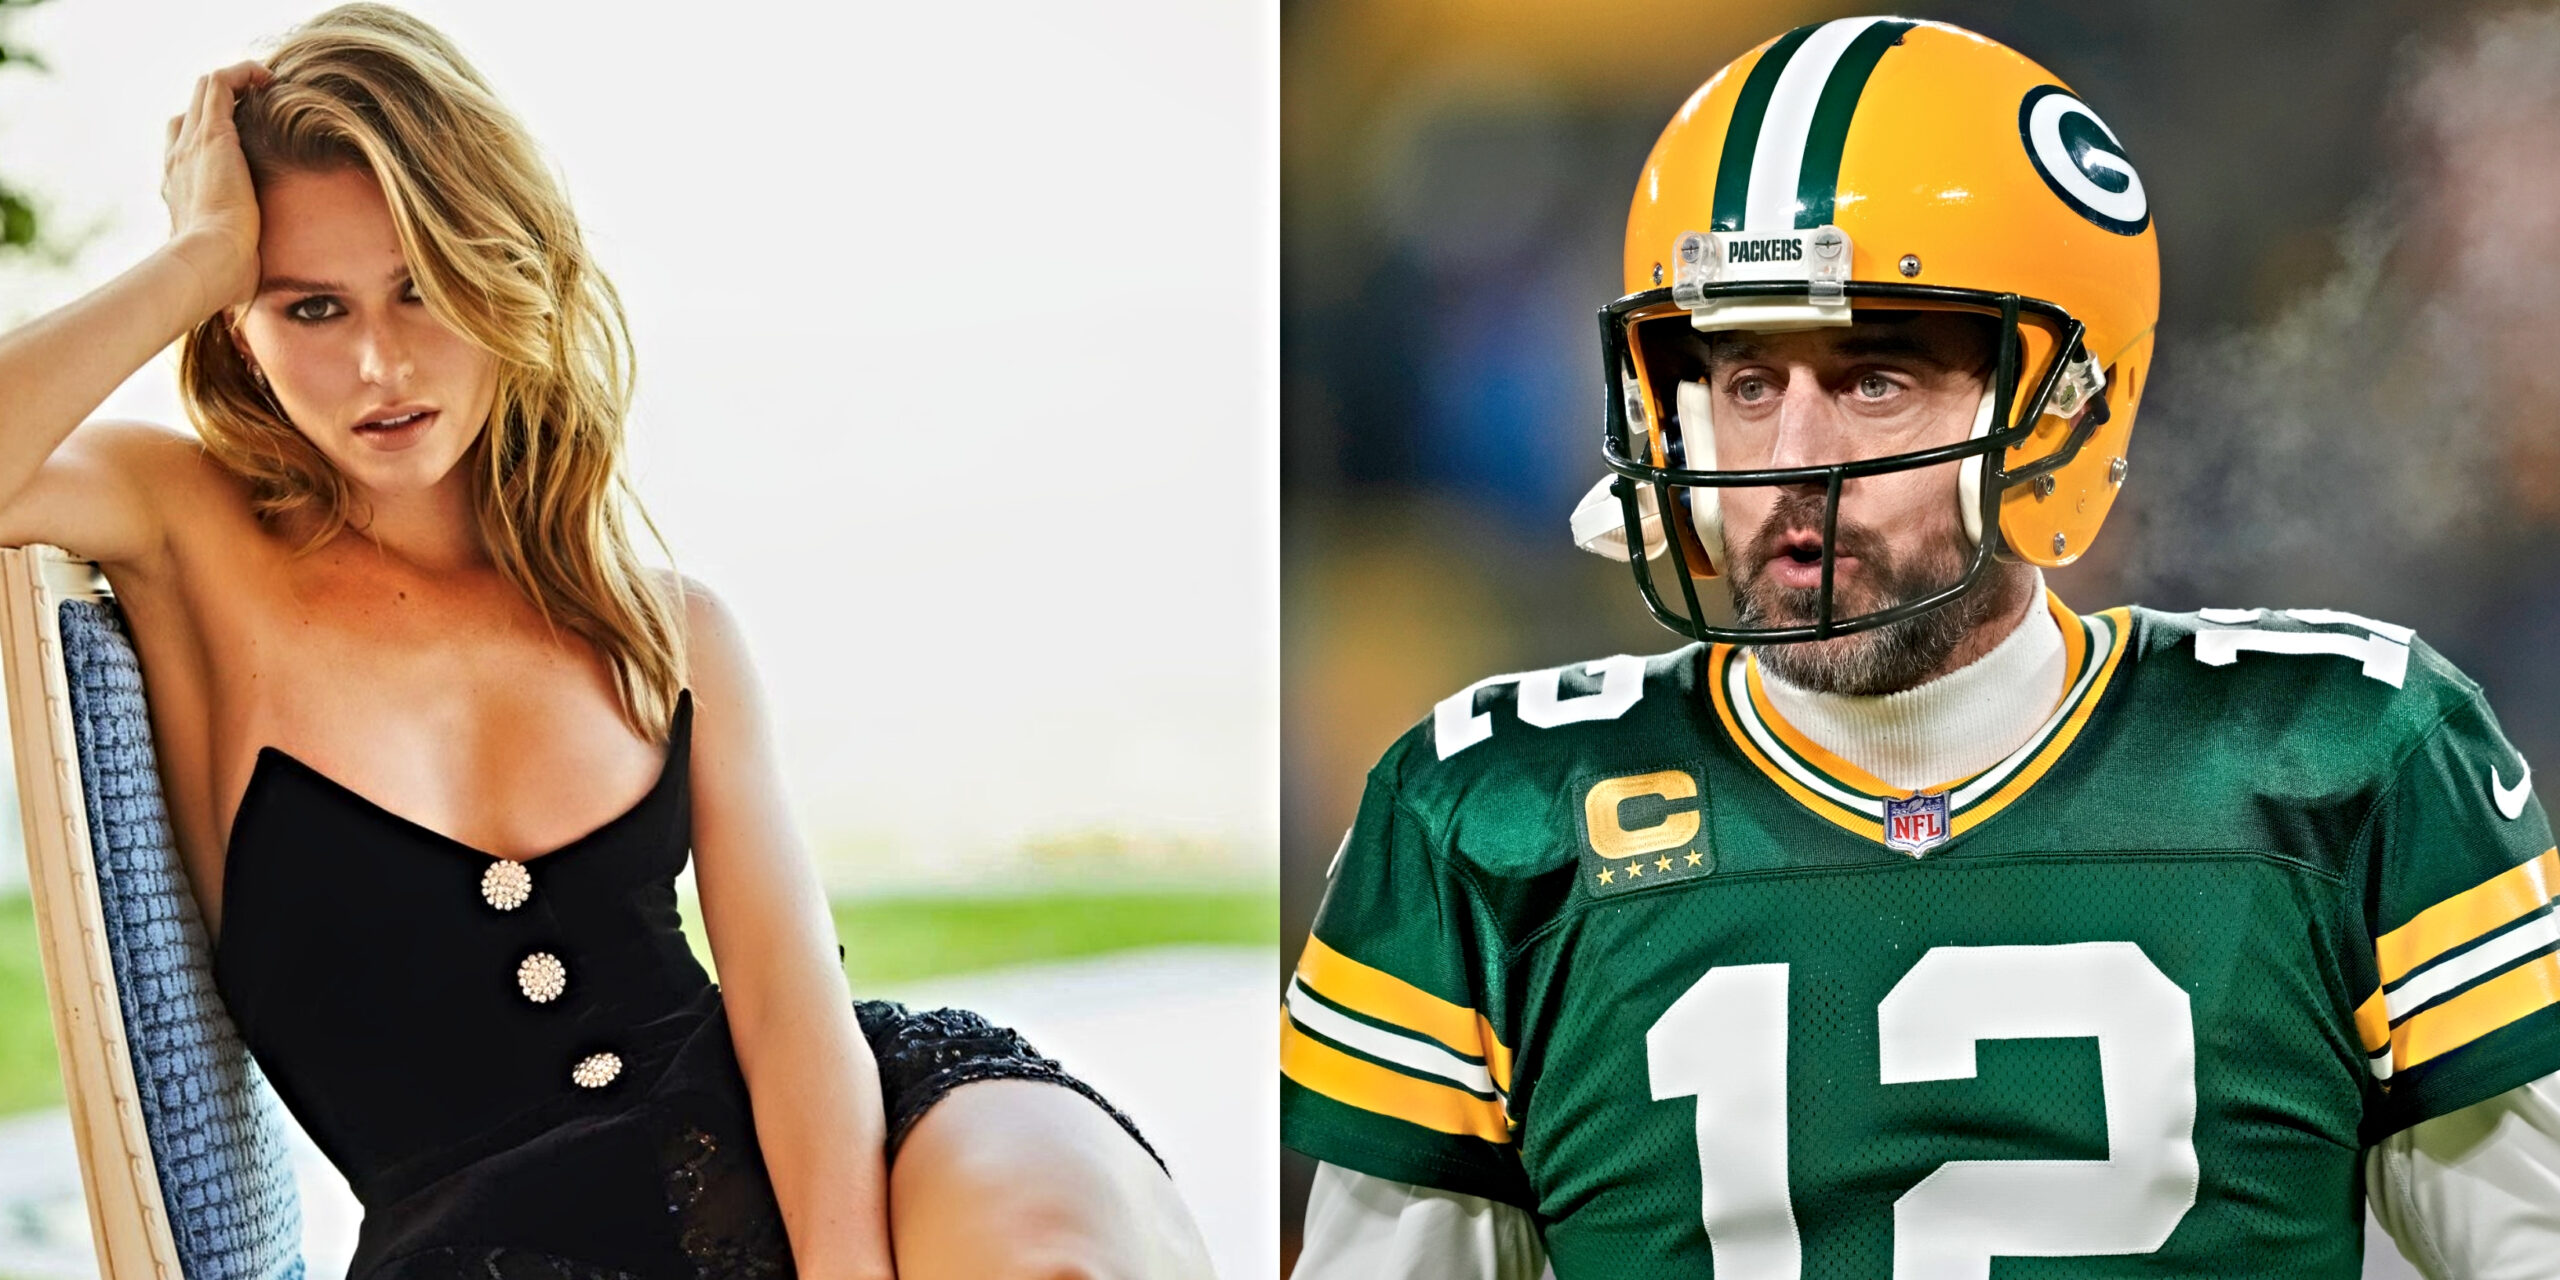 Aaron Rodgers Girlfriend Shares New Photo On Instagram 